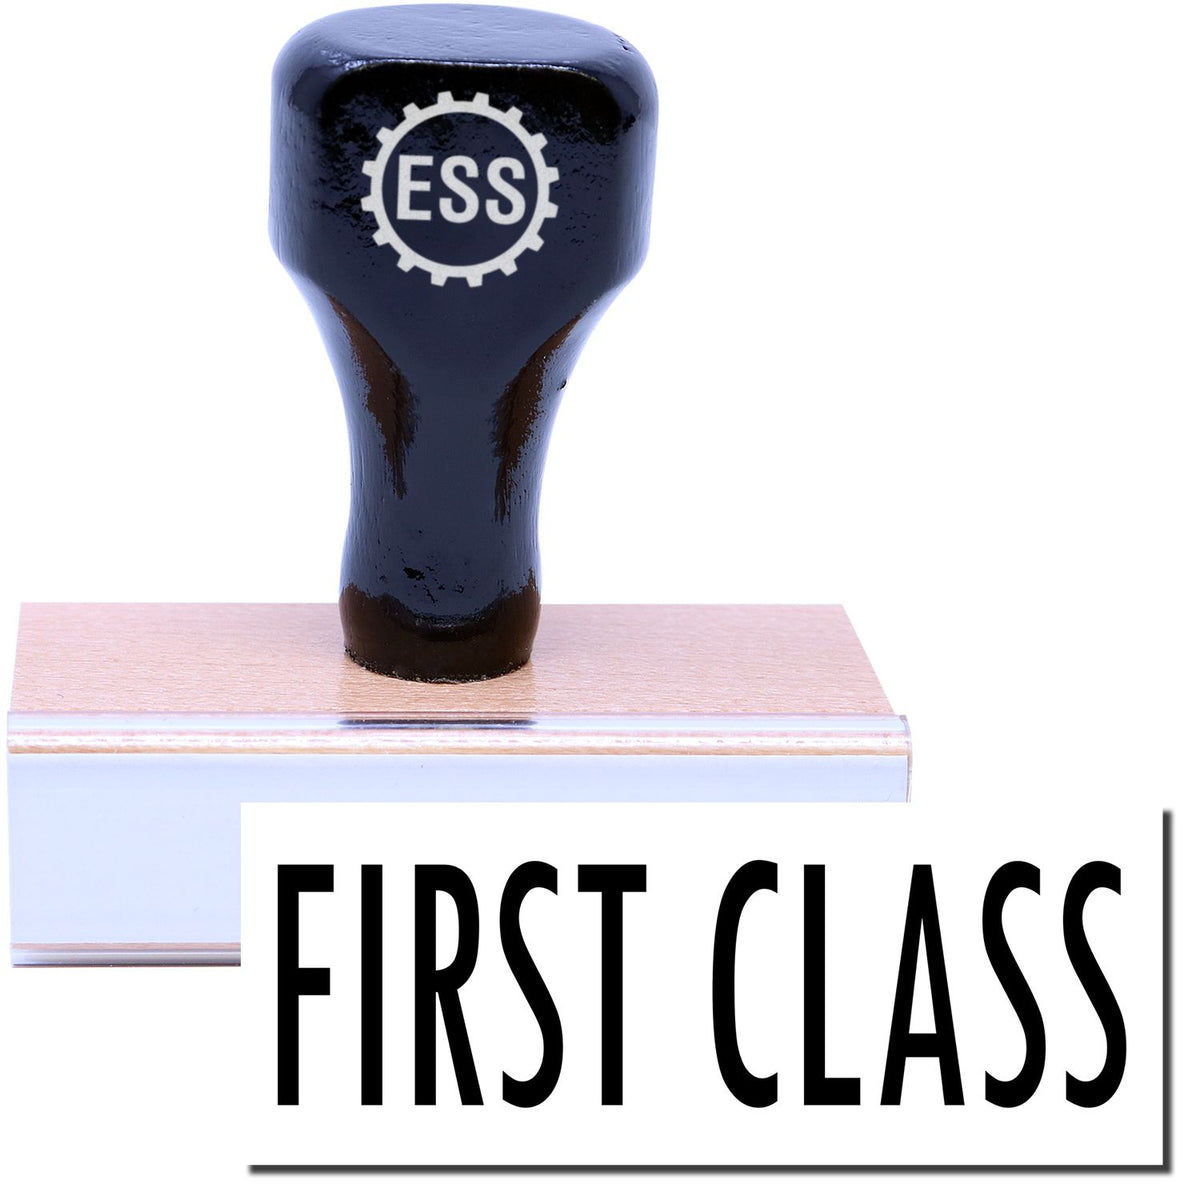 A stock office rubber stamp with a stamped image showing how the text &quot;FIRST CLASS&quot; is displayed after stamping.